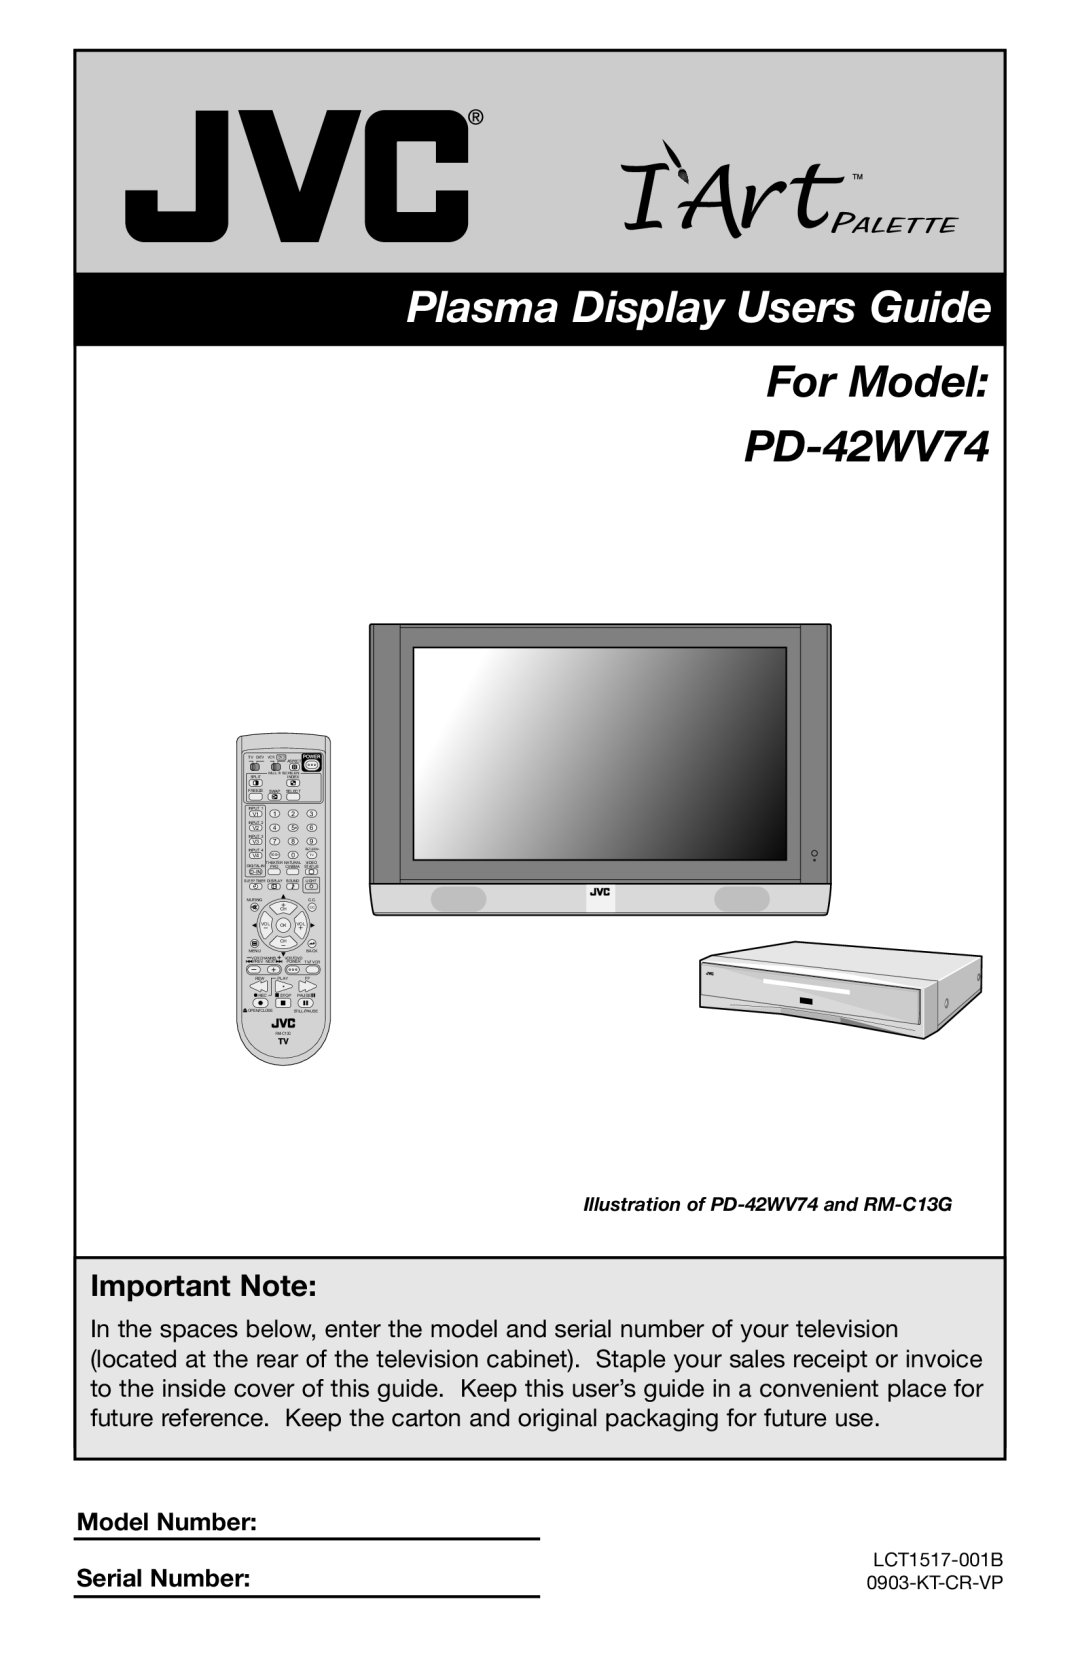 JVC manual Important Note, Model Number Serial Number, Plasma Display Users Guide, For Model PD-42WV74 